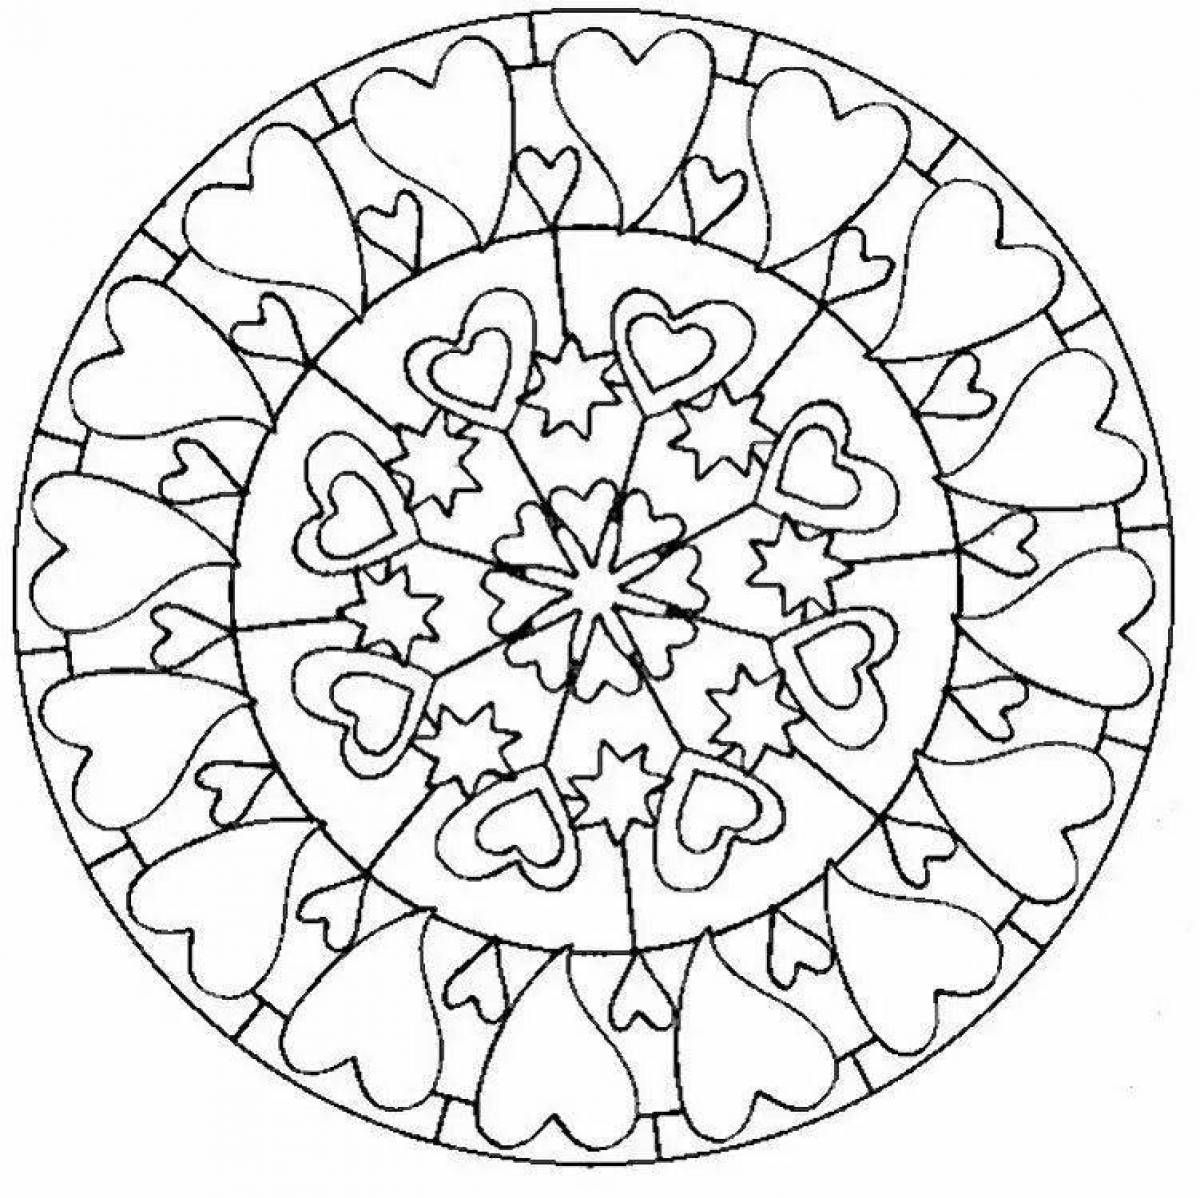 Charming mantra coloring pages